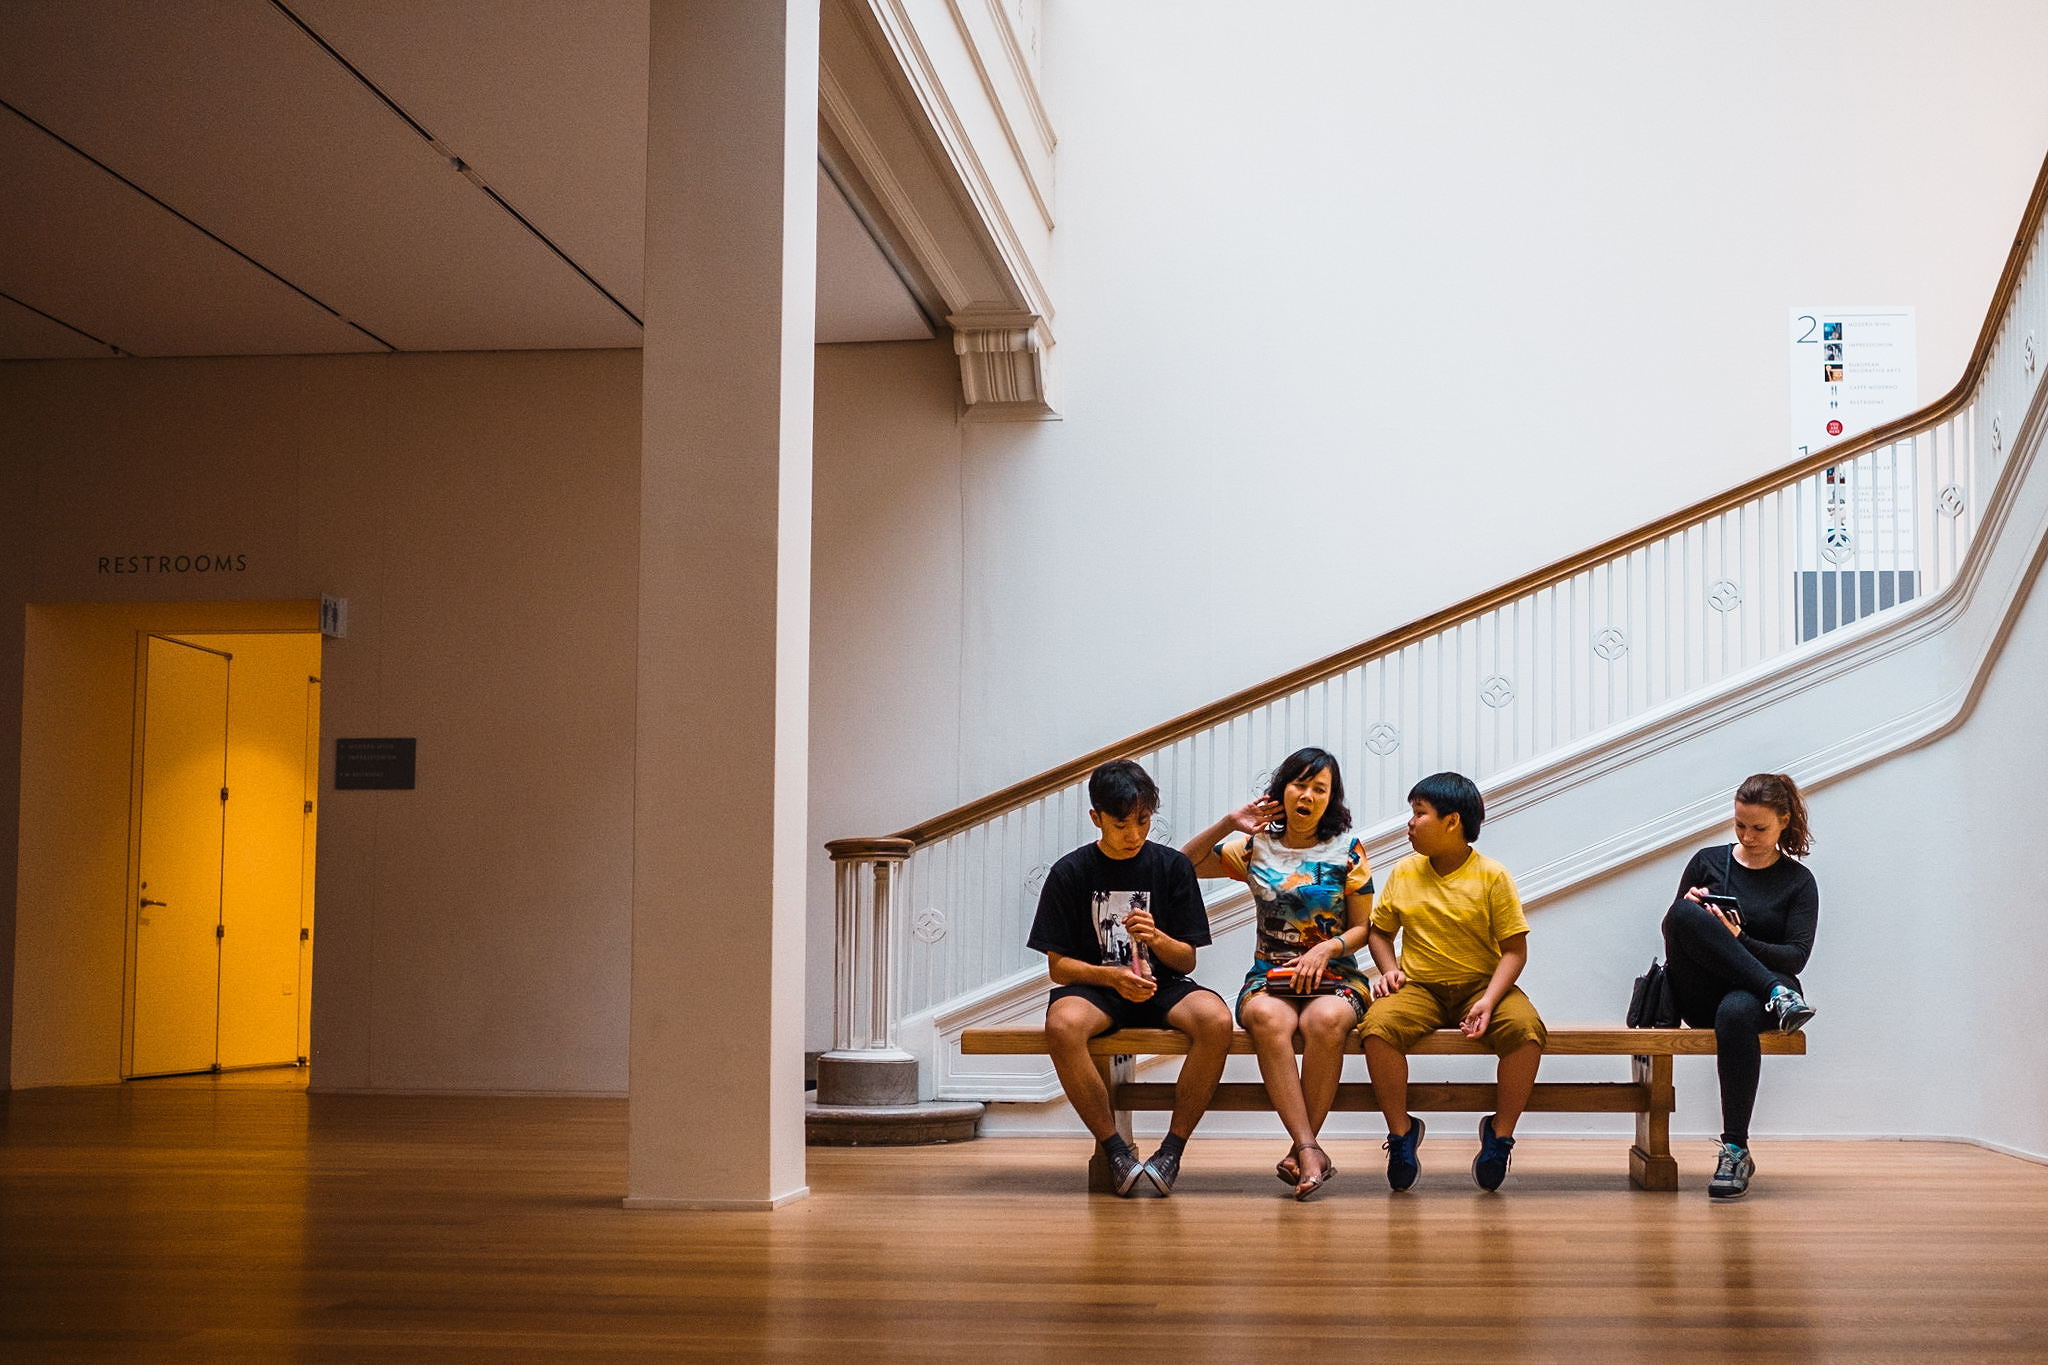 A family sits on a bench in a museum. They appear to be in animated conversation, but one of them is looking away as if to ignore what she's hearing.